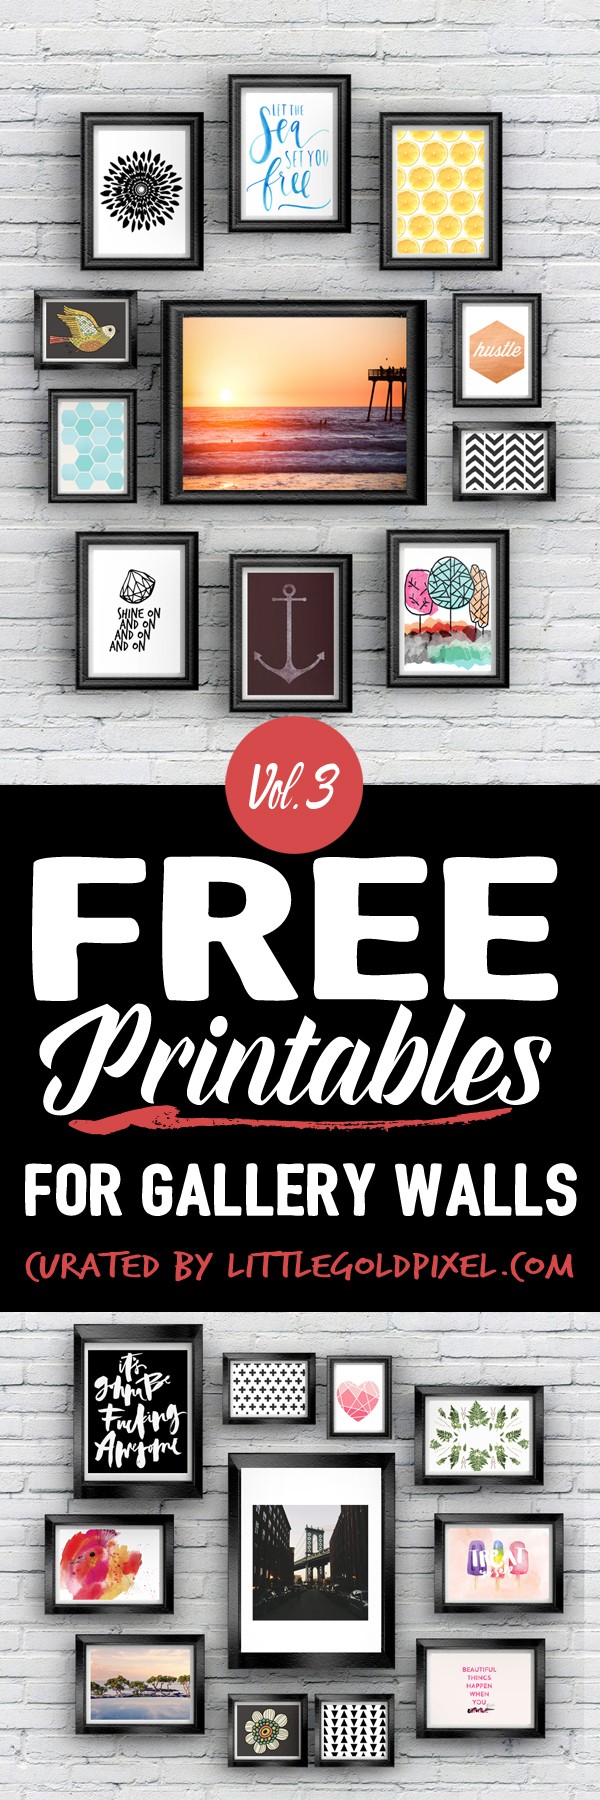 Hang These Free Printables On Your Gallery Walls • Vol. 3 • In the latest roundup, I focus on an eclectic mix of patterns, prints, illustrations and stock photography to freshen up your home decor.